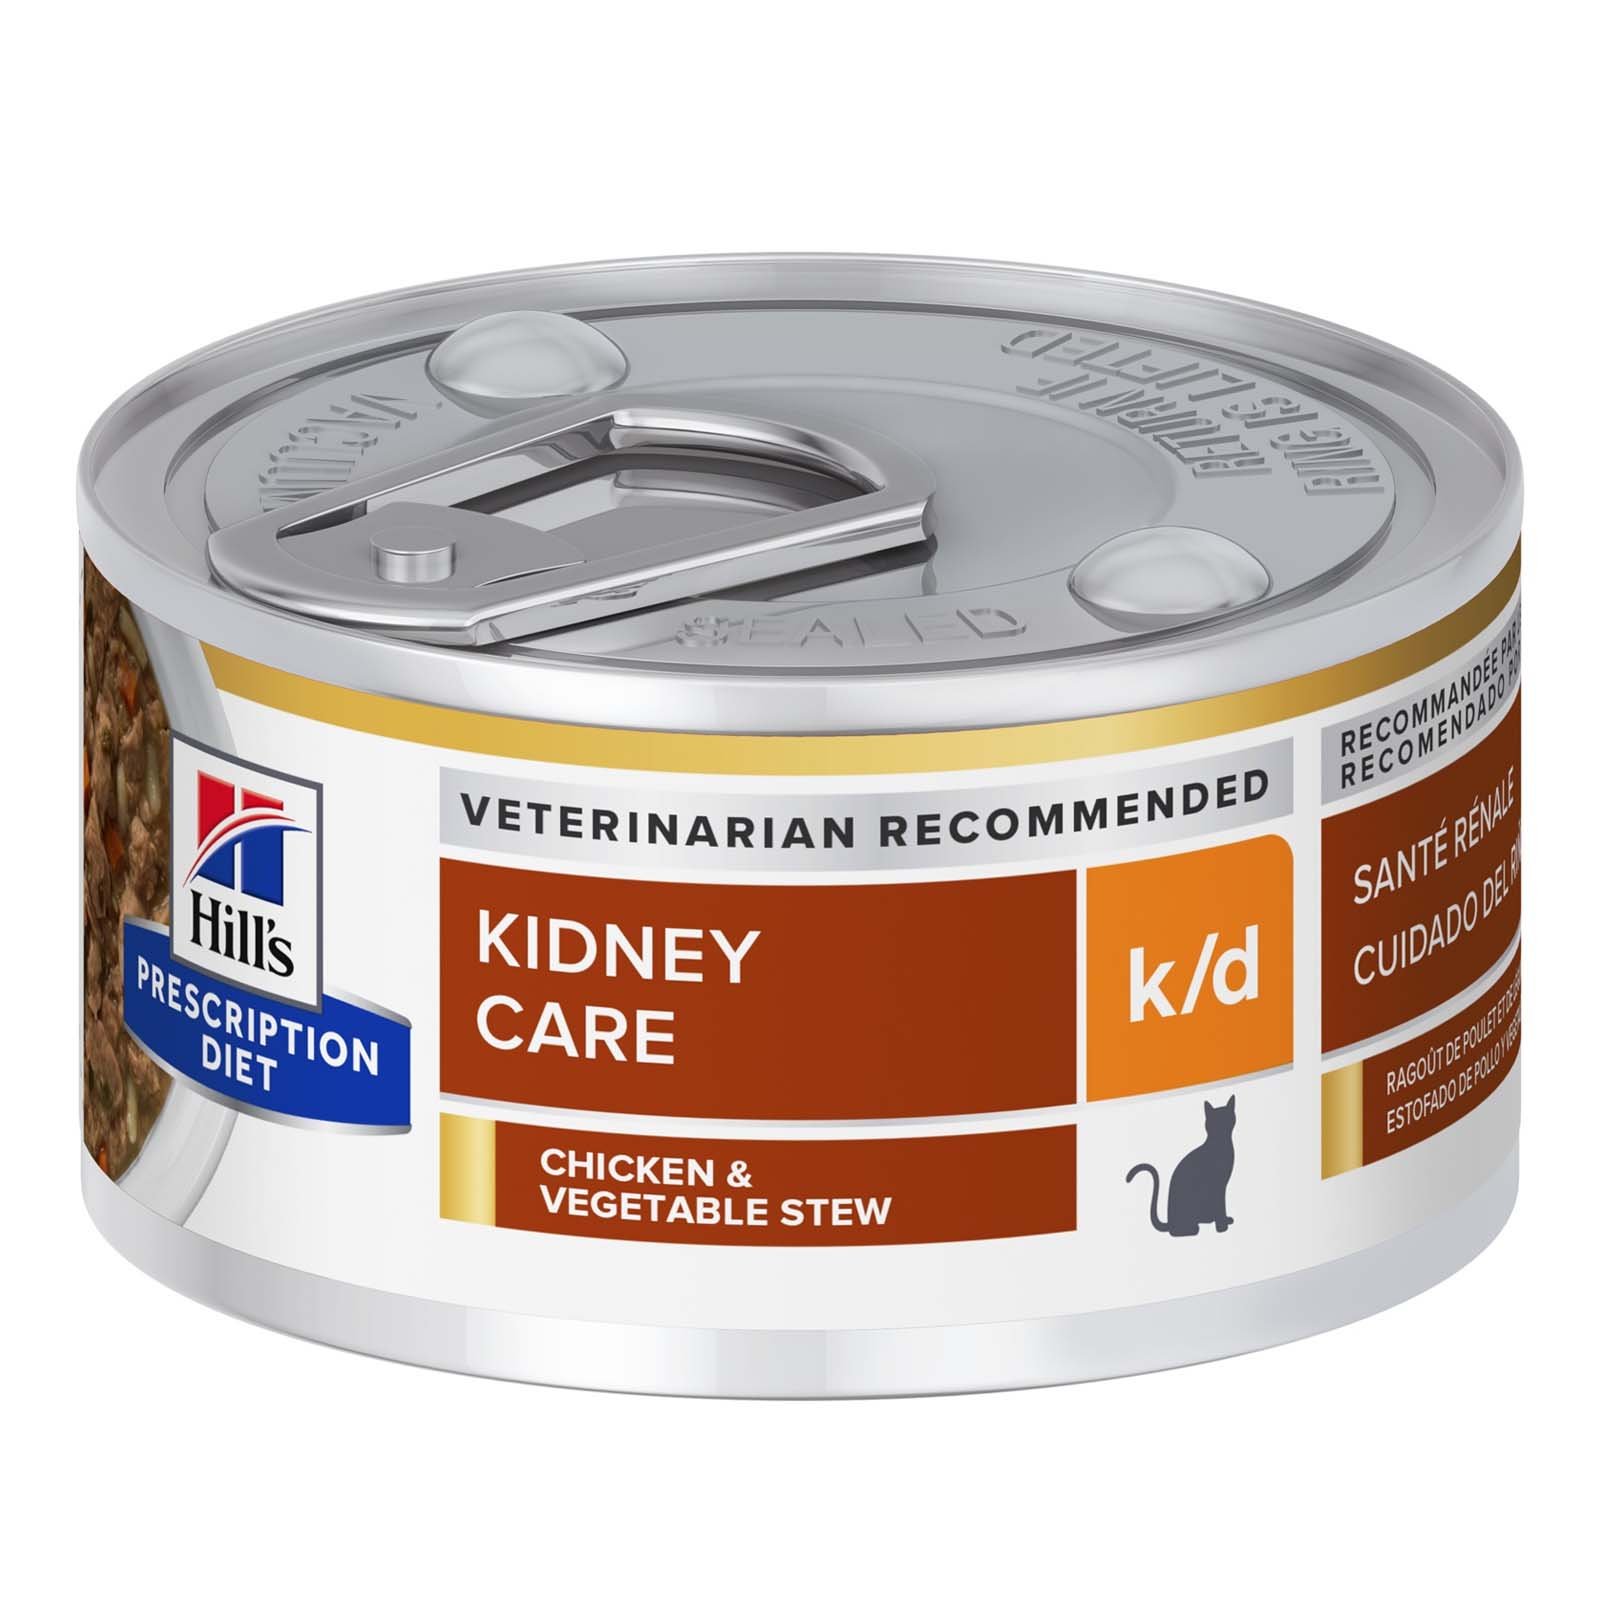 Hill’s Prescription Diet k/d Kidney Care with Chicken & Vegetable Stew Canned Cat Food